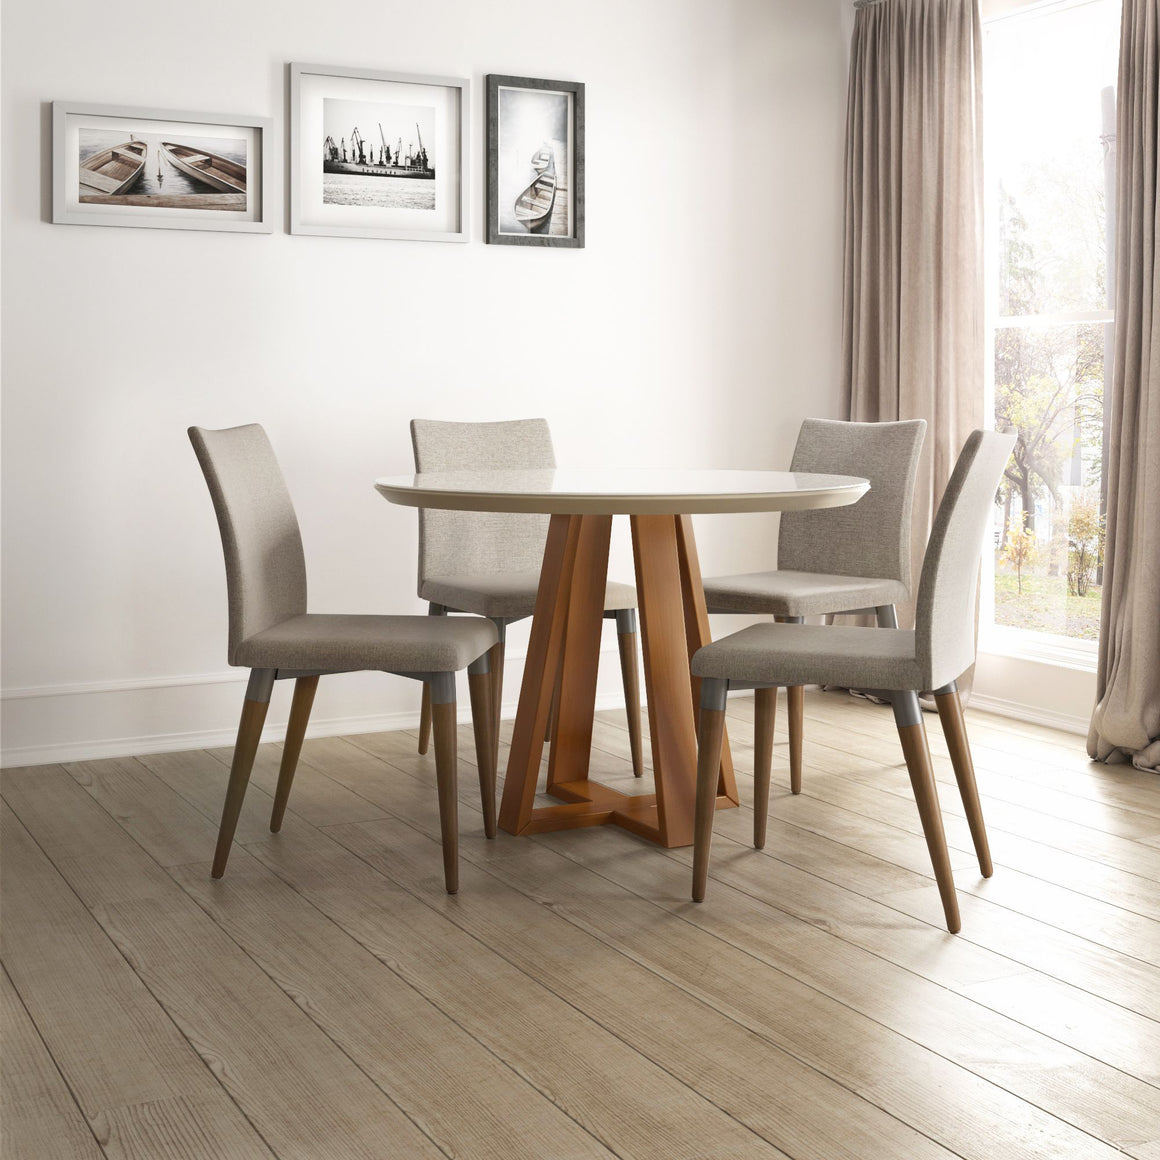 Duffy 45.27 Modern Round Dining Table and Charles Dining Chairs in Off White and Dark Grey - Set of 5